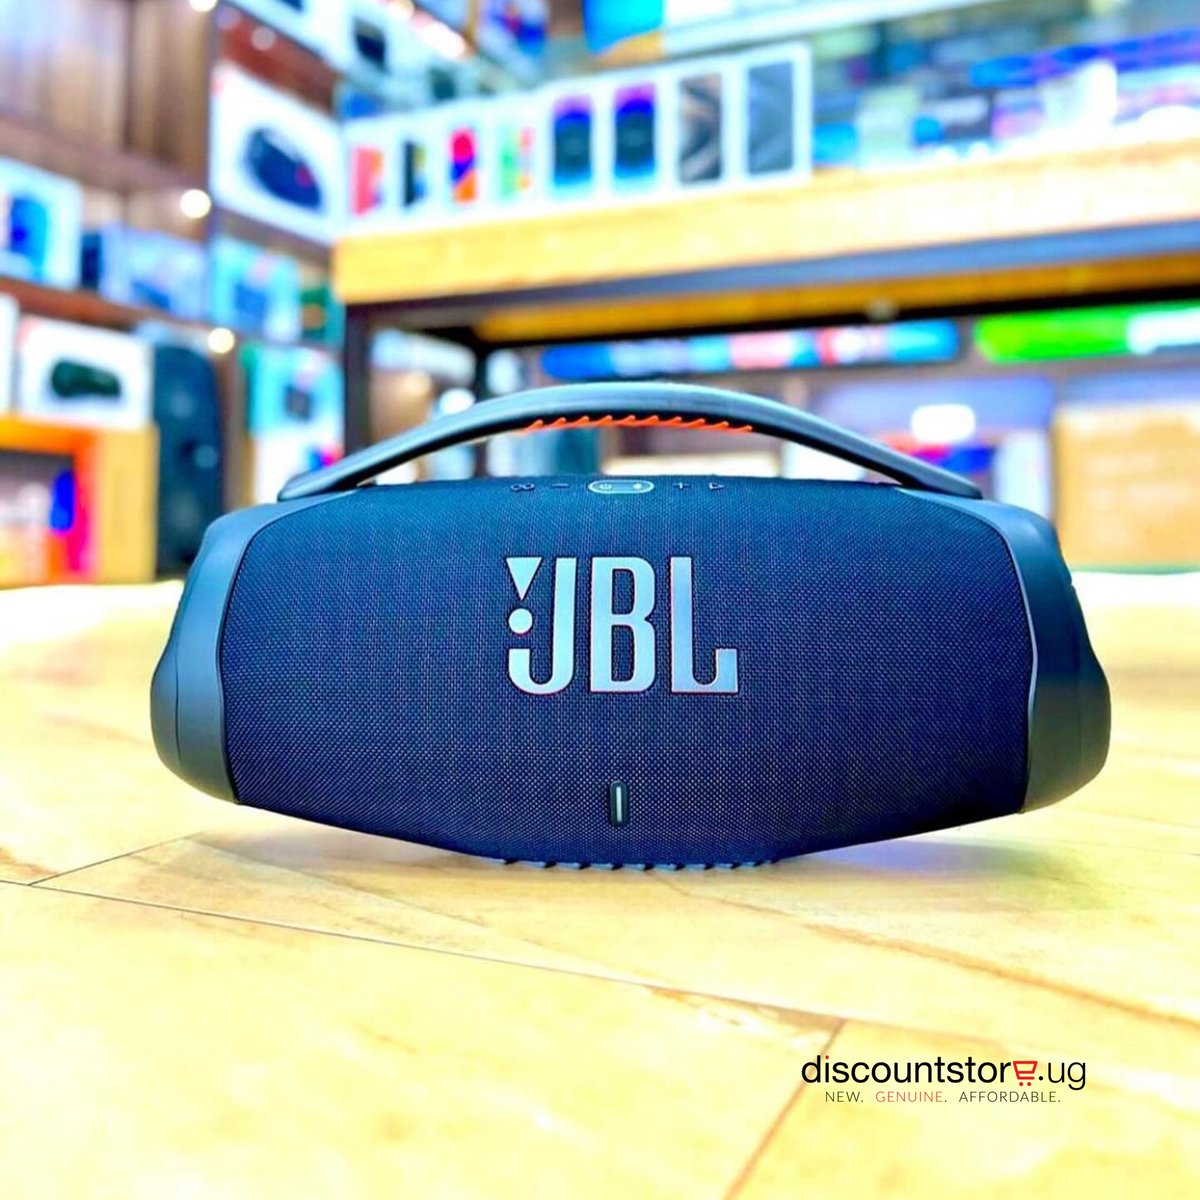 JBL Boombox 3 speaker features outstanding design & delivers strong, loud sound with up to 24hrs battery 🔋life. Ready for fun anywhere, anytime. Add more excitement to the gathering with PartyBoost, allowing you to connect several speakers together for a massive sound experience